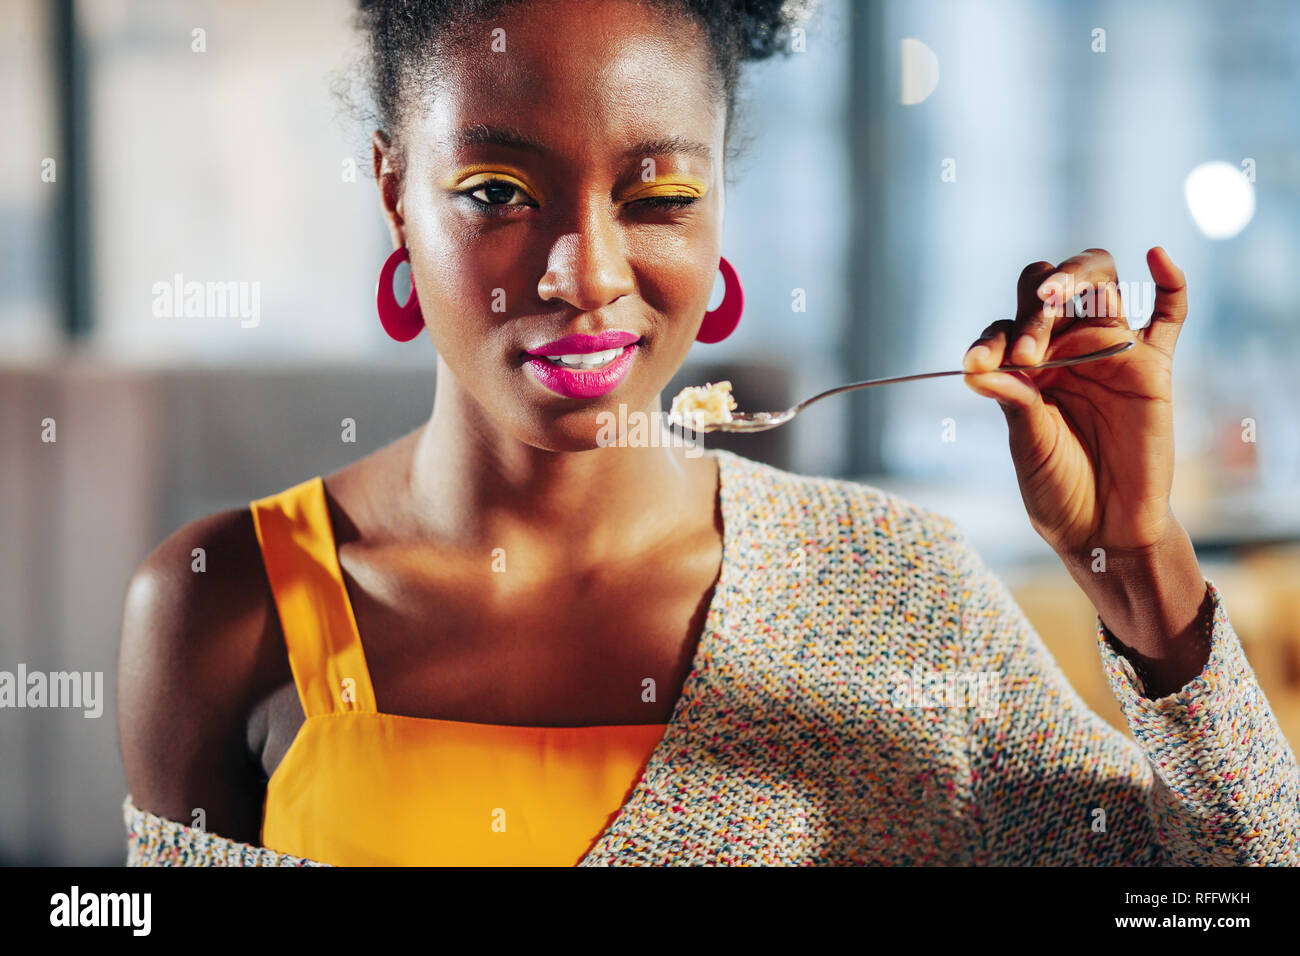 African-American woman with bright pink lips eating dessert Stock Photo